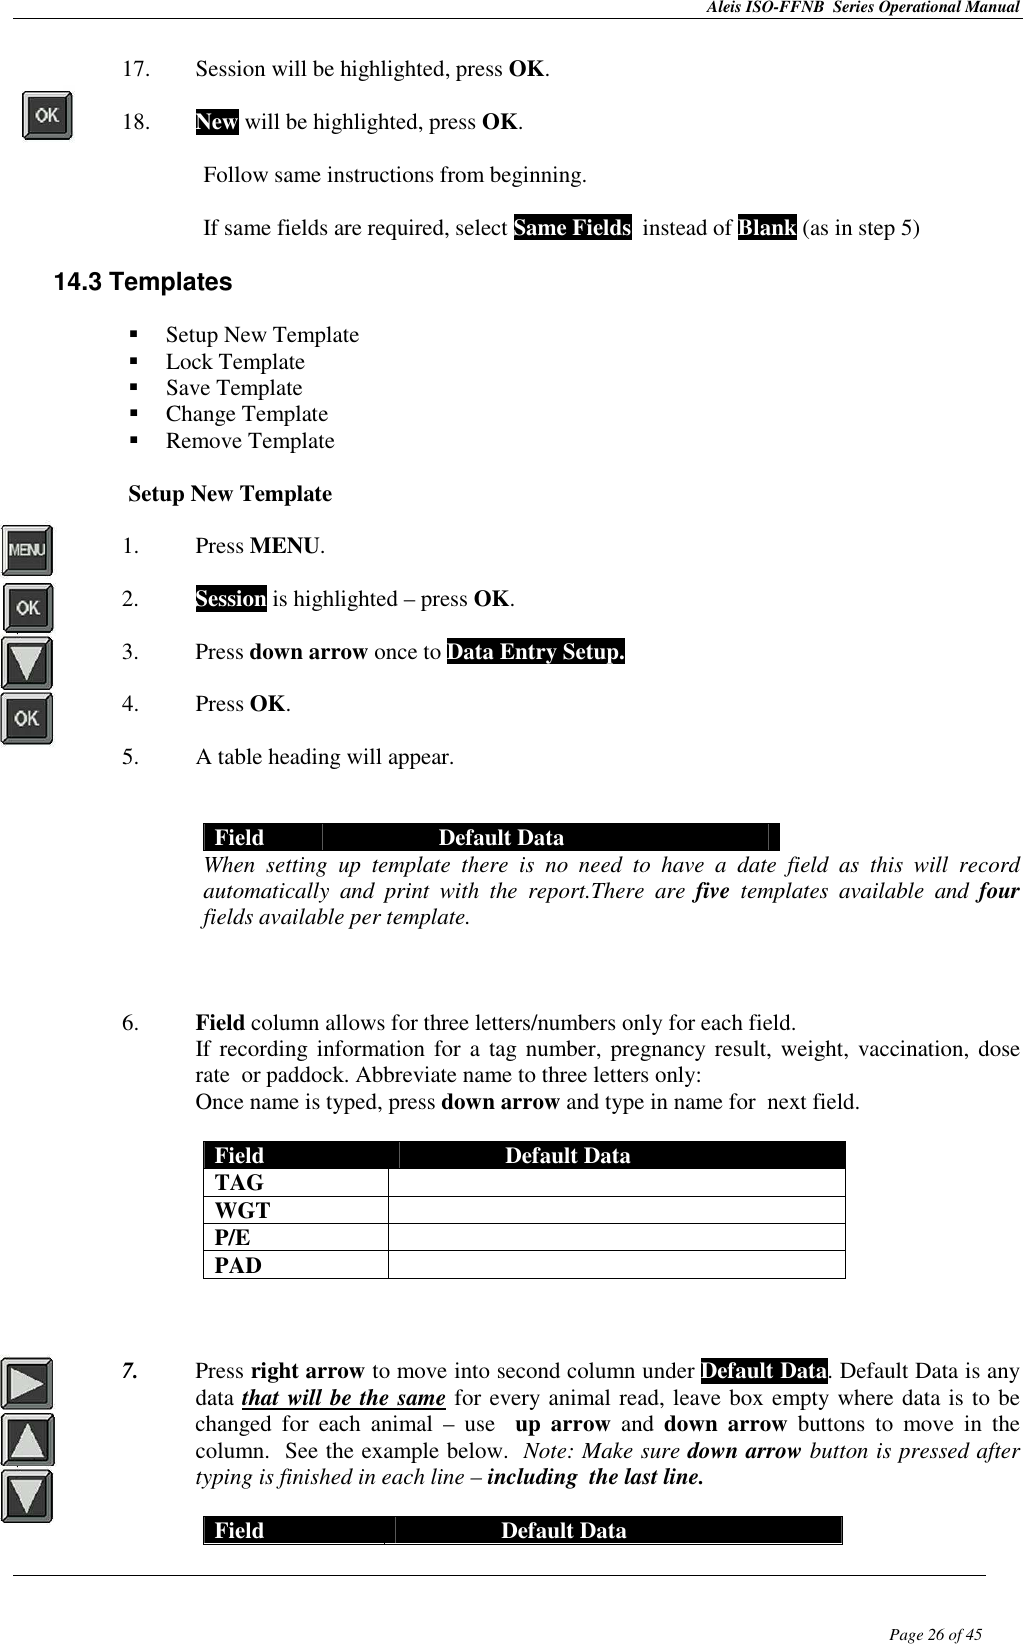 Aleis ISO-FFNB  Series Operational Manual  Page 26 of 45 17. Session will be highlighted, press OK.  18. New will be highlighted, press OK.  Follow same instructions from beginning.  If same fields are required, select Same Fields  instead of Blank (as in step 5)  14.3 Templates    Setup New Template  Lock Template  Save Template  Change Template  Remove Template  Setup New Template  1. Press MENU.  2. Session is highlighted – press OK.  3. Press down arrow once to Data Entry Setup.  4. Press OK.  5. A table heading will appear.    Field  Default Data When  setting  up  template  there  is  no  need  to  have  a  date  field  as  this  will  record automatically  and  print  with  the  report.There  are  five  templates  available  and  four fields available per template.    6. Field column allows for three letters/numbers only for each field.   If recording information for  a tag number, pregnancy result, weight, vaccination, dose rate  or paddock. Abbreviate name to three letters only:  Once name is typed, press down arrow and type in name for  next field.  Field  Default Data TAG   WGT   P/E   PAD      7. Press right arrow to move into second column under Default Data. Default Data is any data that will be the same for every animal read, leave box empty where data is to be changed  for  each  animal  –  use    up  arrow  and  down  arrow  buttons  to  move  in  the column.  See the example below.  Note: Make sure down arrow button is pressed after typing is finished in each line – including  the last line.  Field  Default Data 